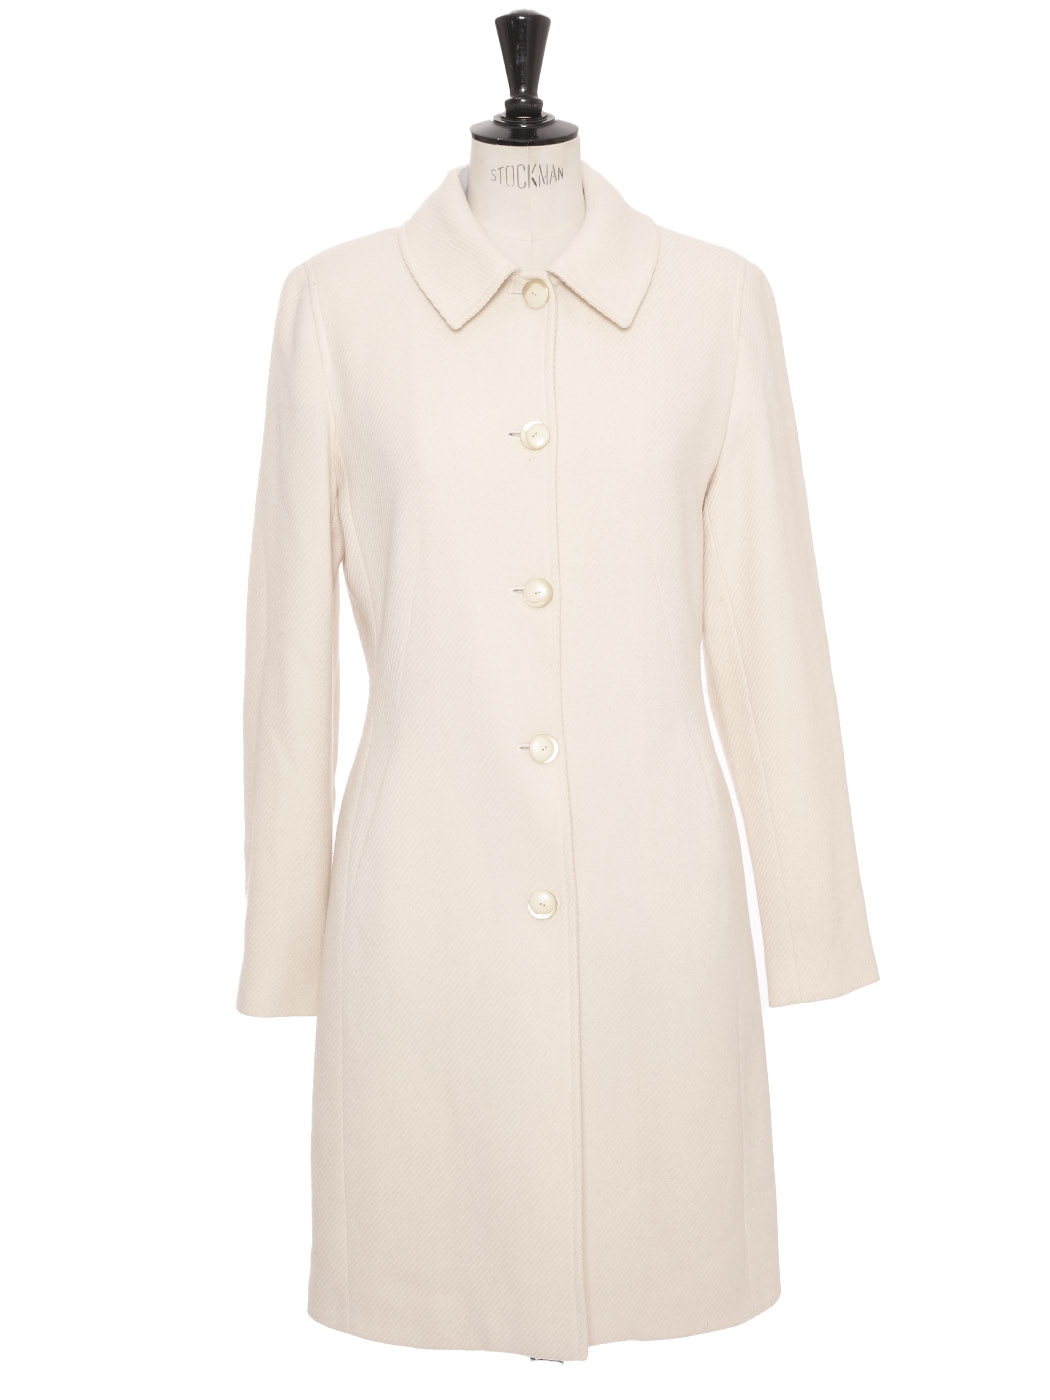 Boutique SYNONYME BY GEORGE RECH Cream white wool mid-length coat